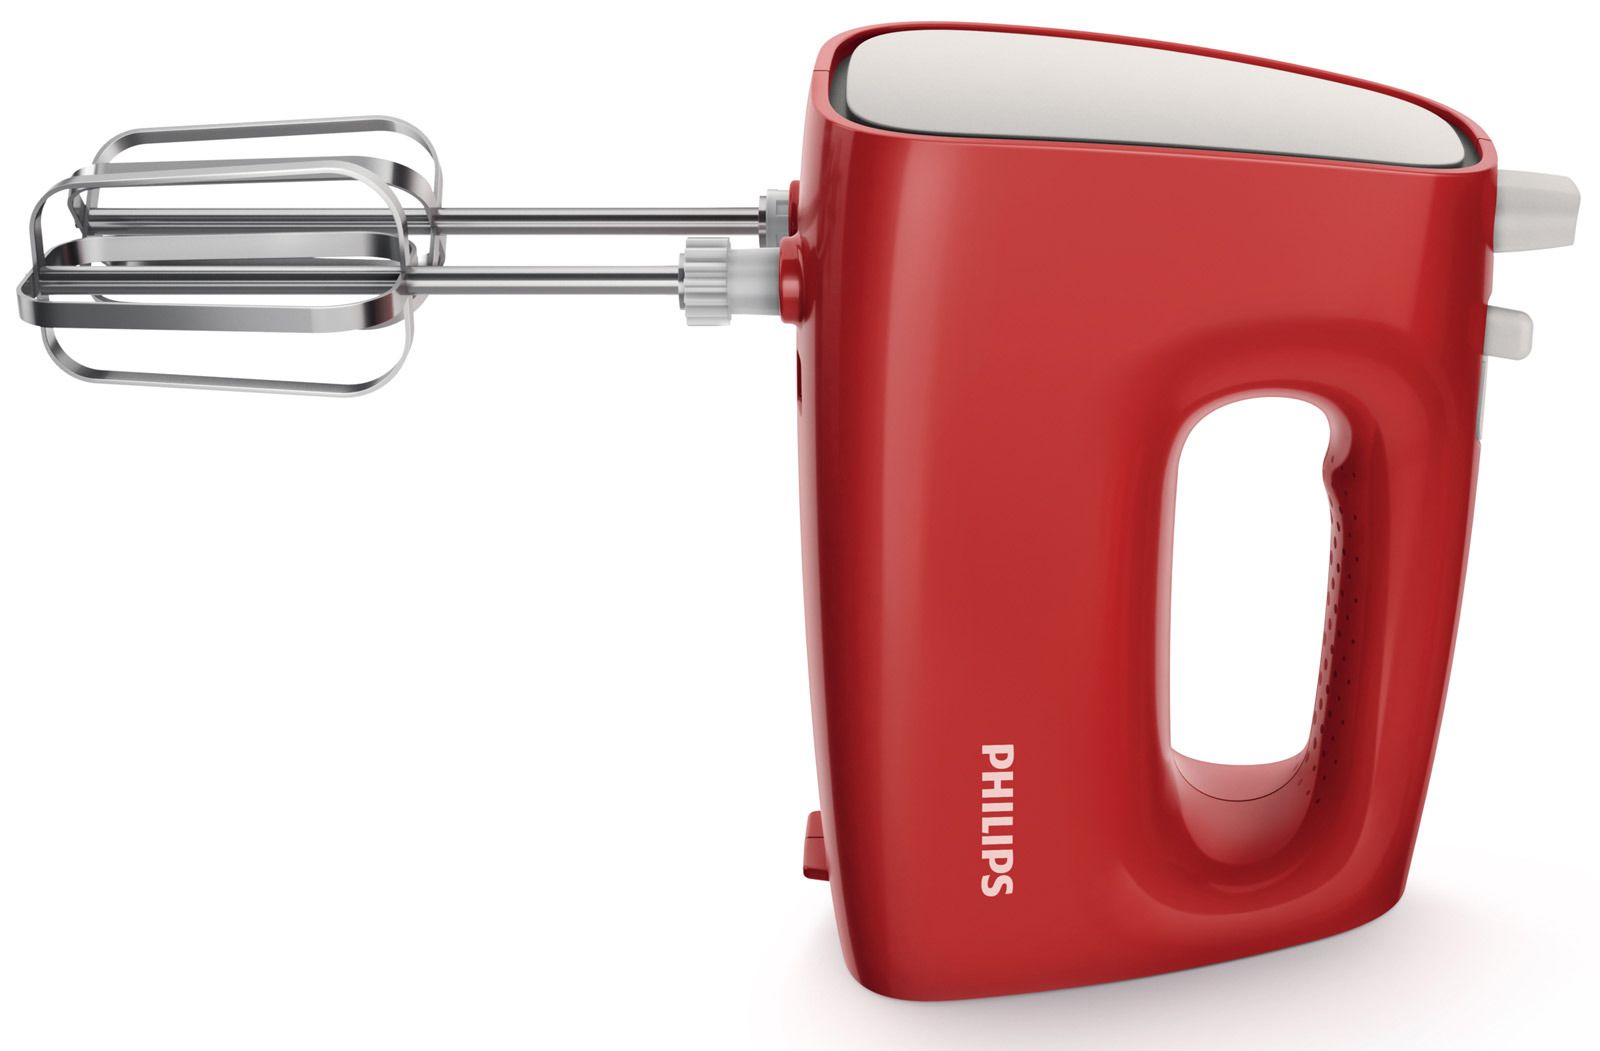  Philips HR1552/12, Red